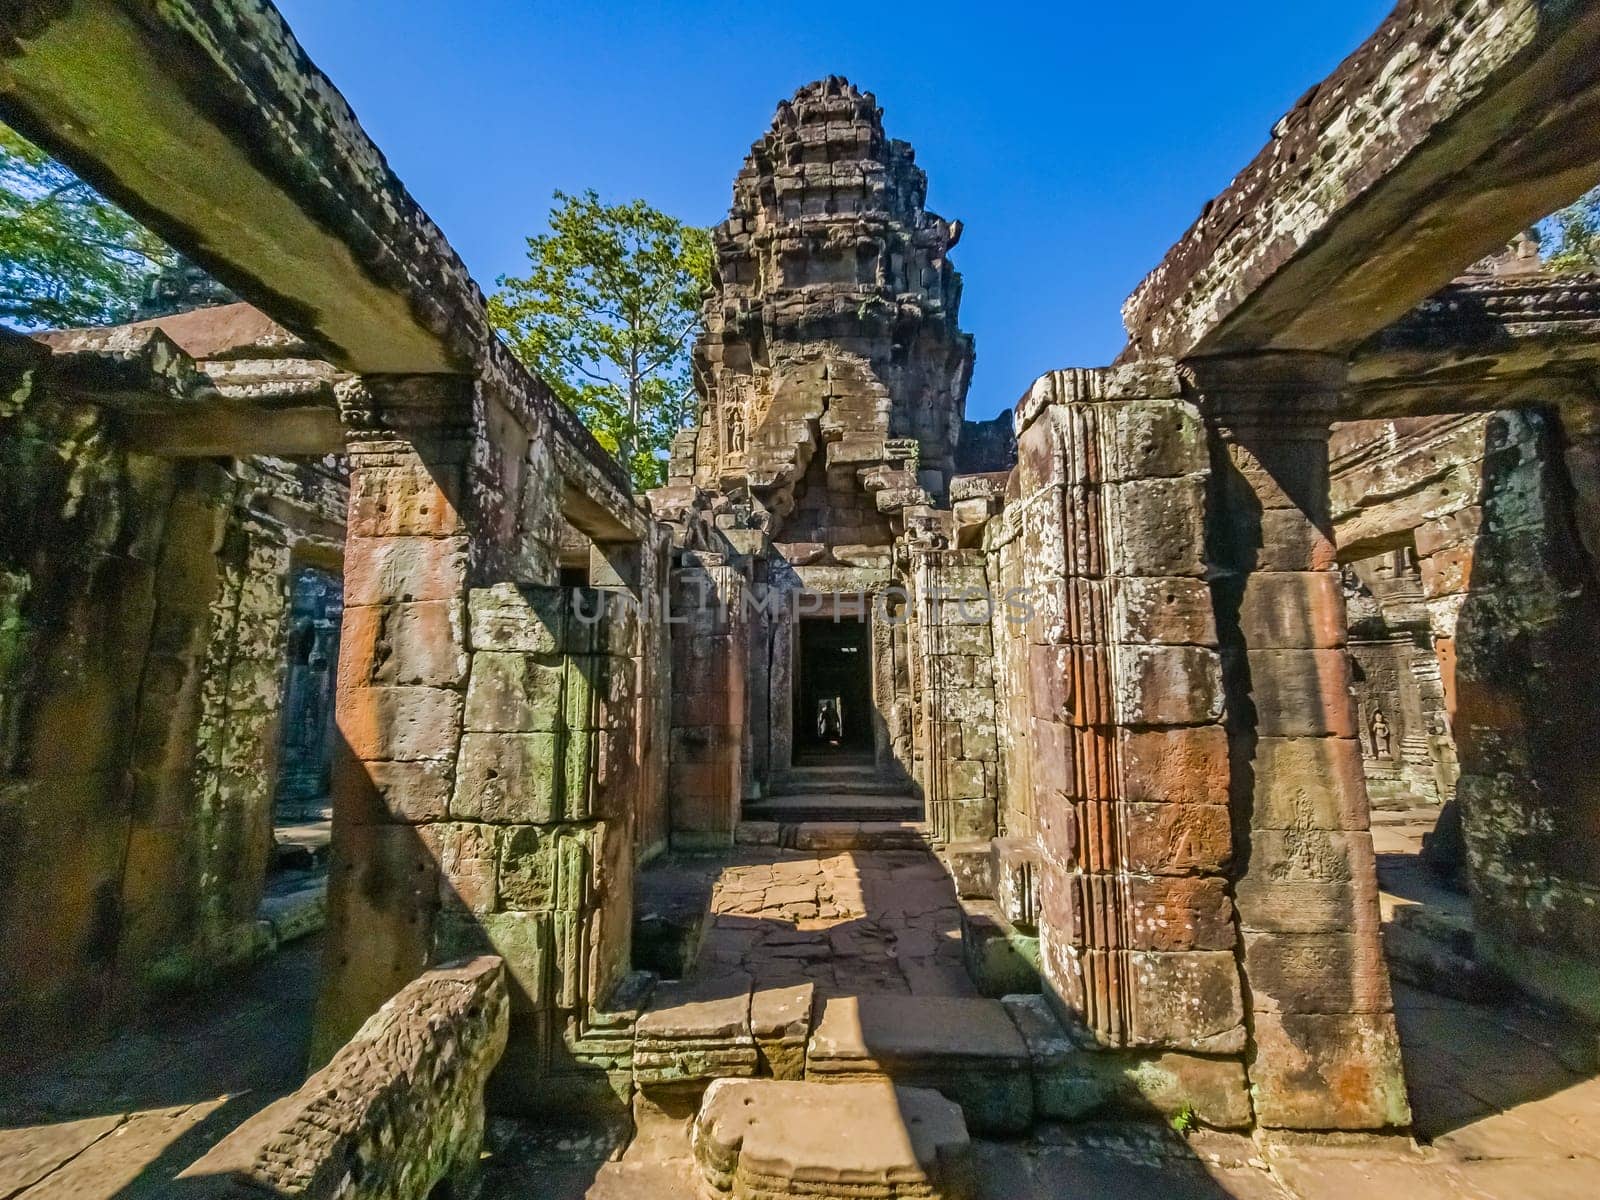 Banteay Kdei temple at Angkor Thom, Siem Reap, Cambodia by Elenaphotos21